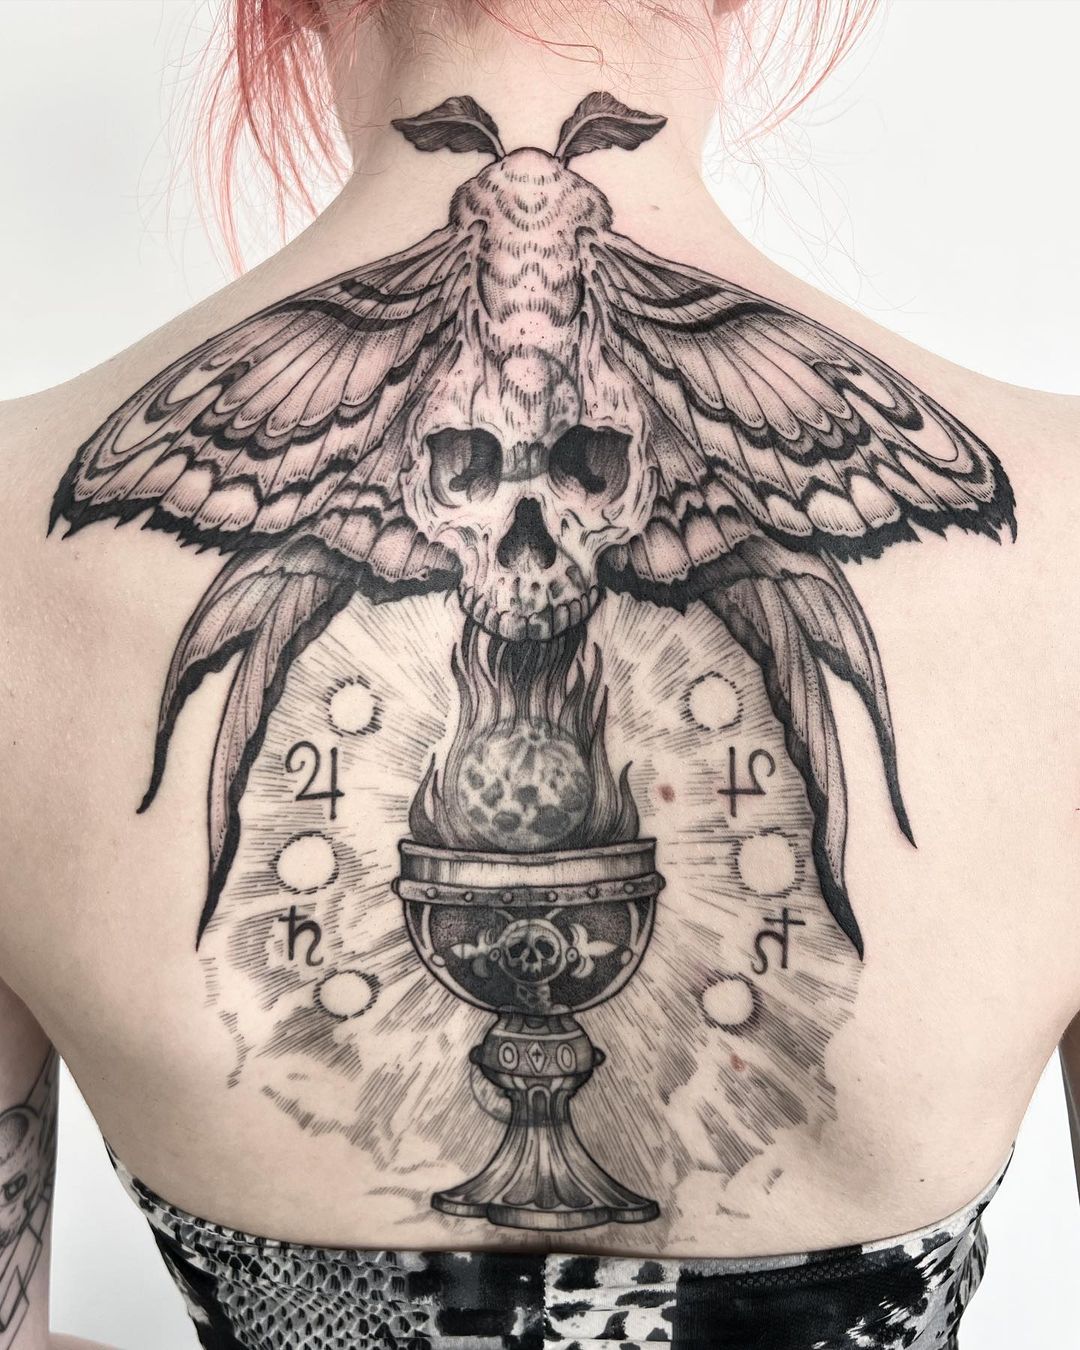 🔥🔥 Moth Tattoo: The complete guide (Meaning and designs!)